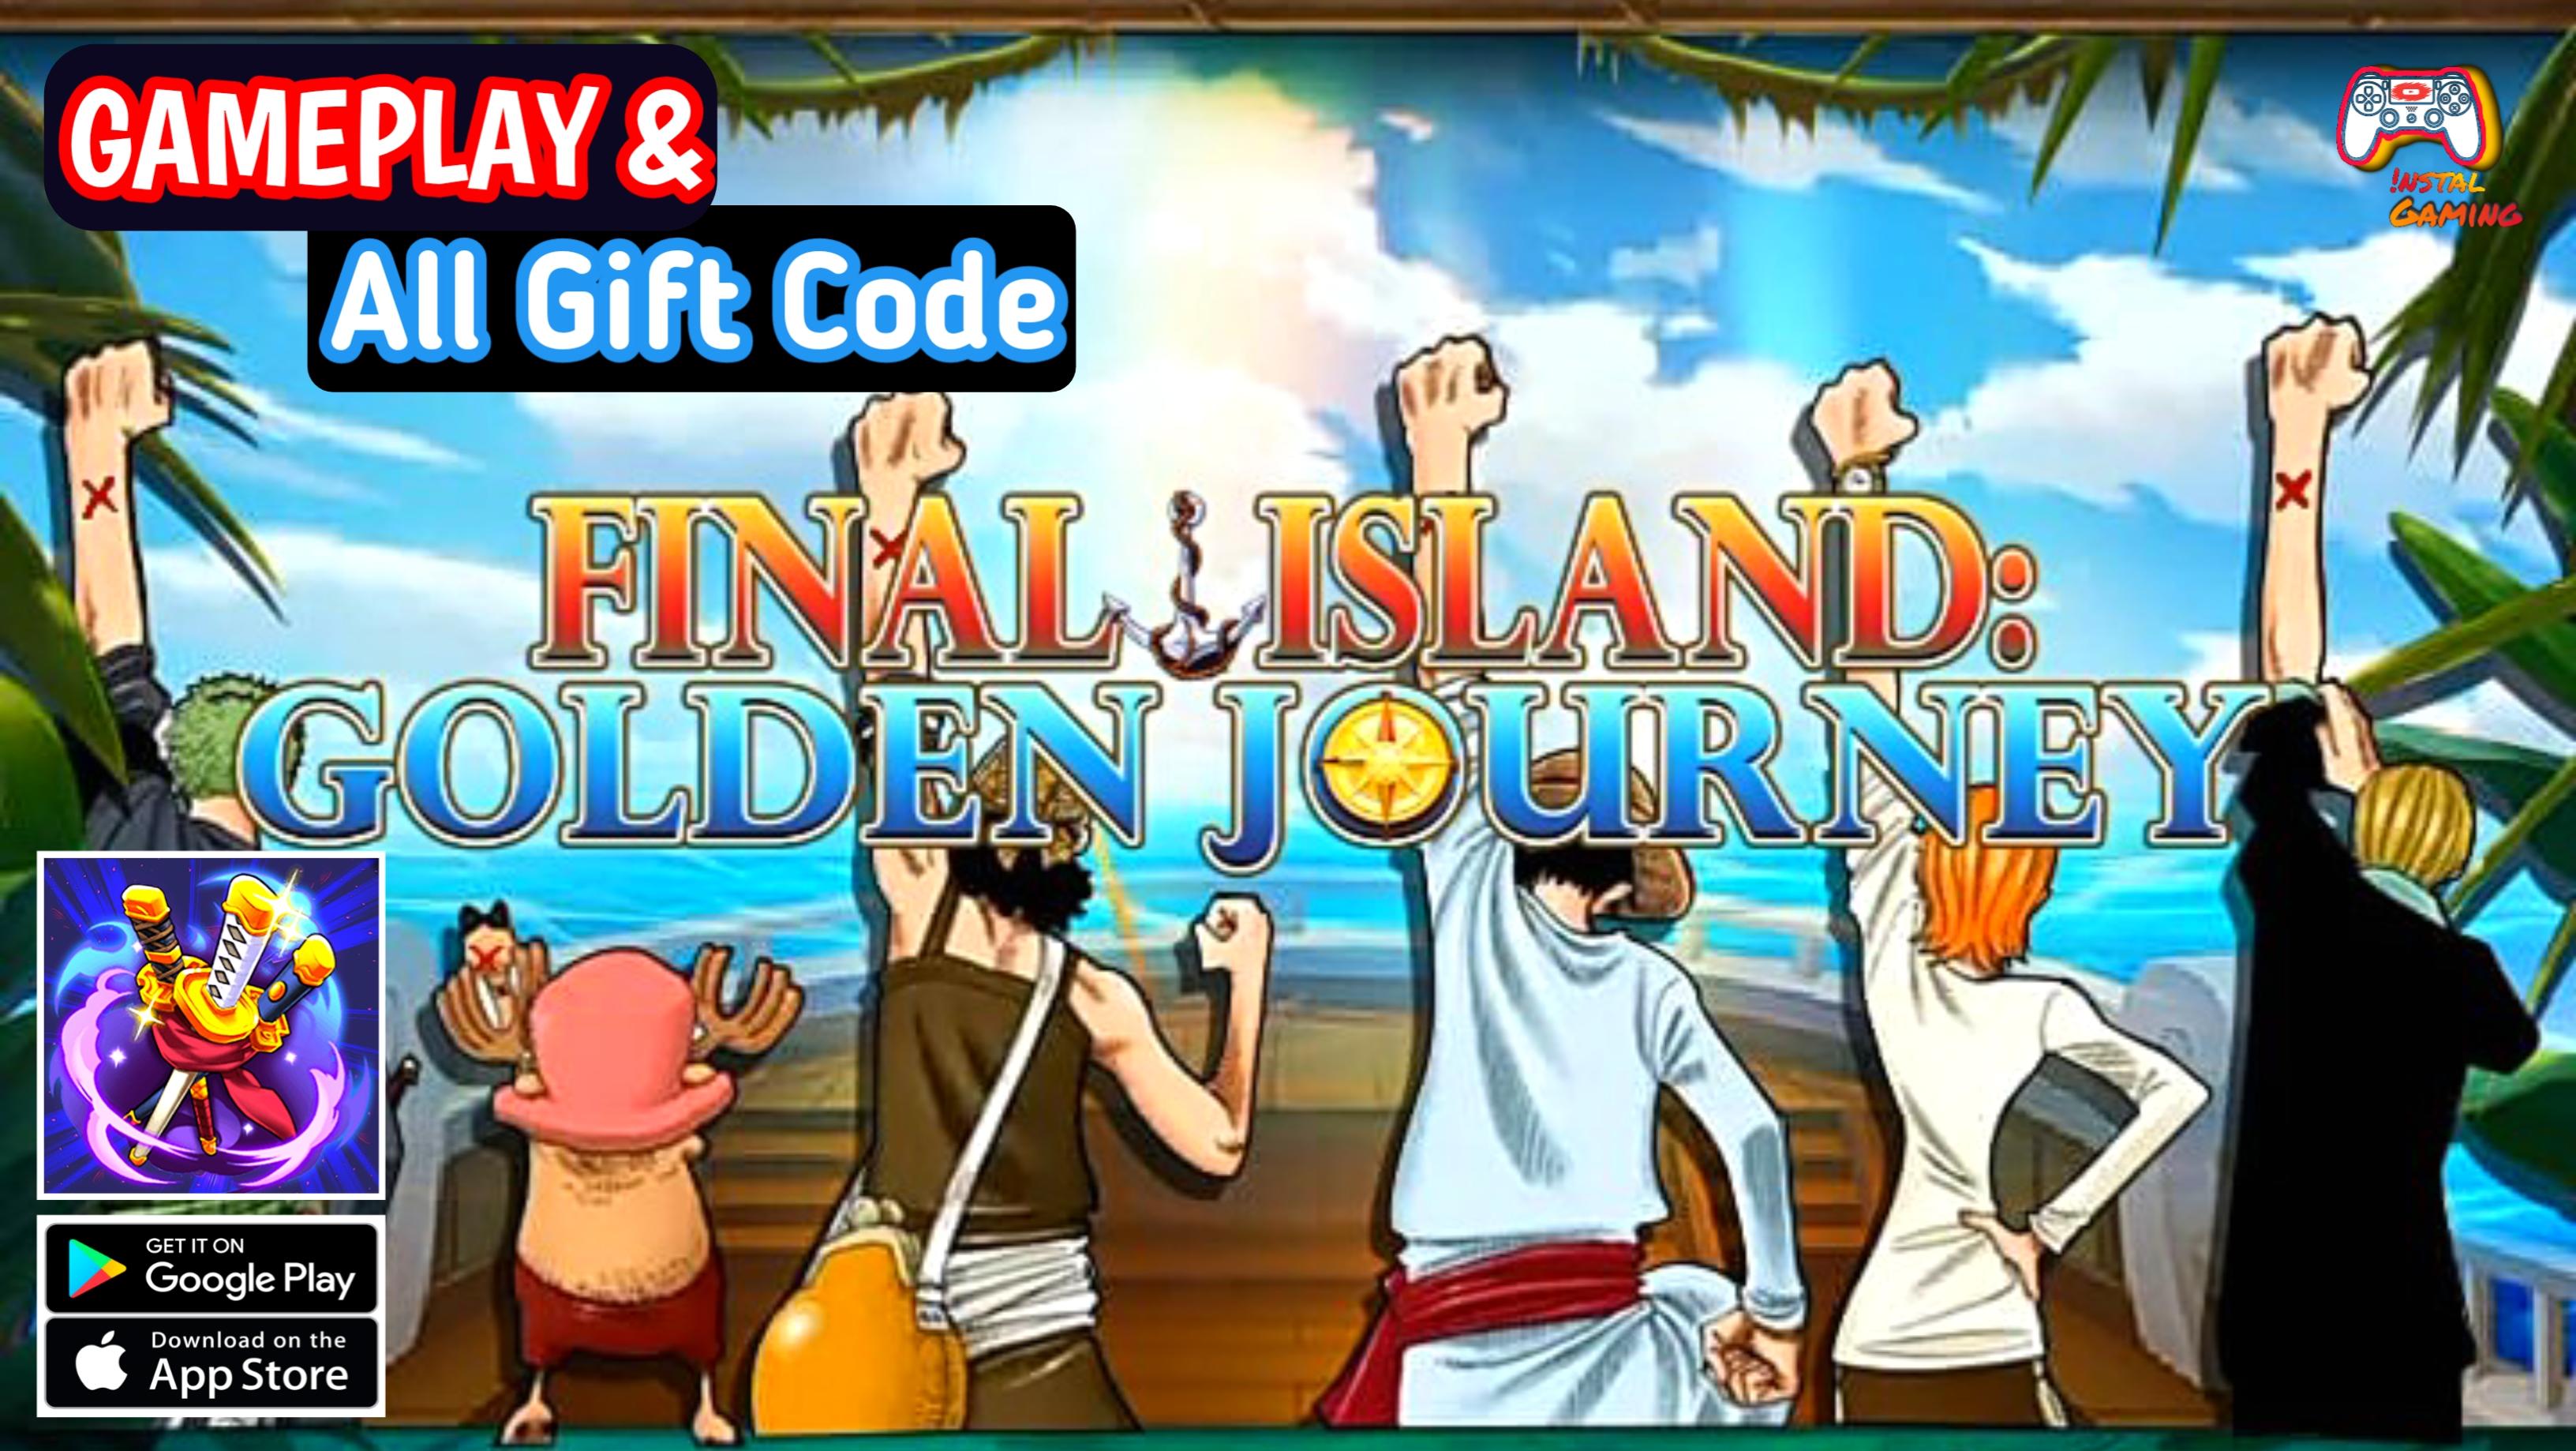 A One Piece game codes I What codes are still active?